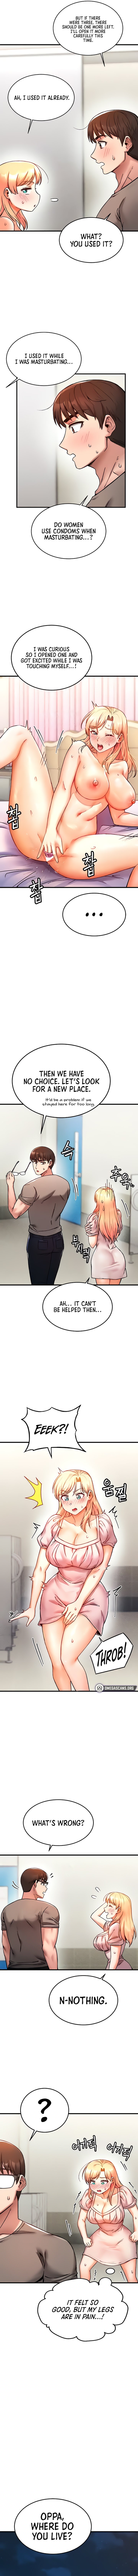 Kangcheol’s Bosses - Chapter 5 Page 7